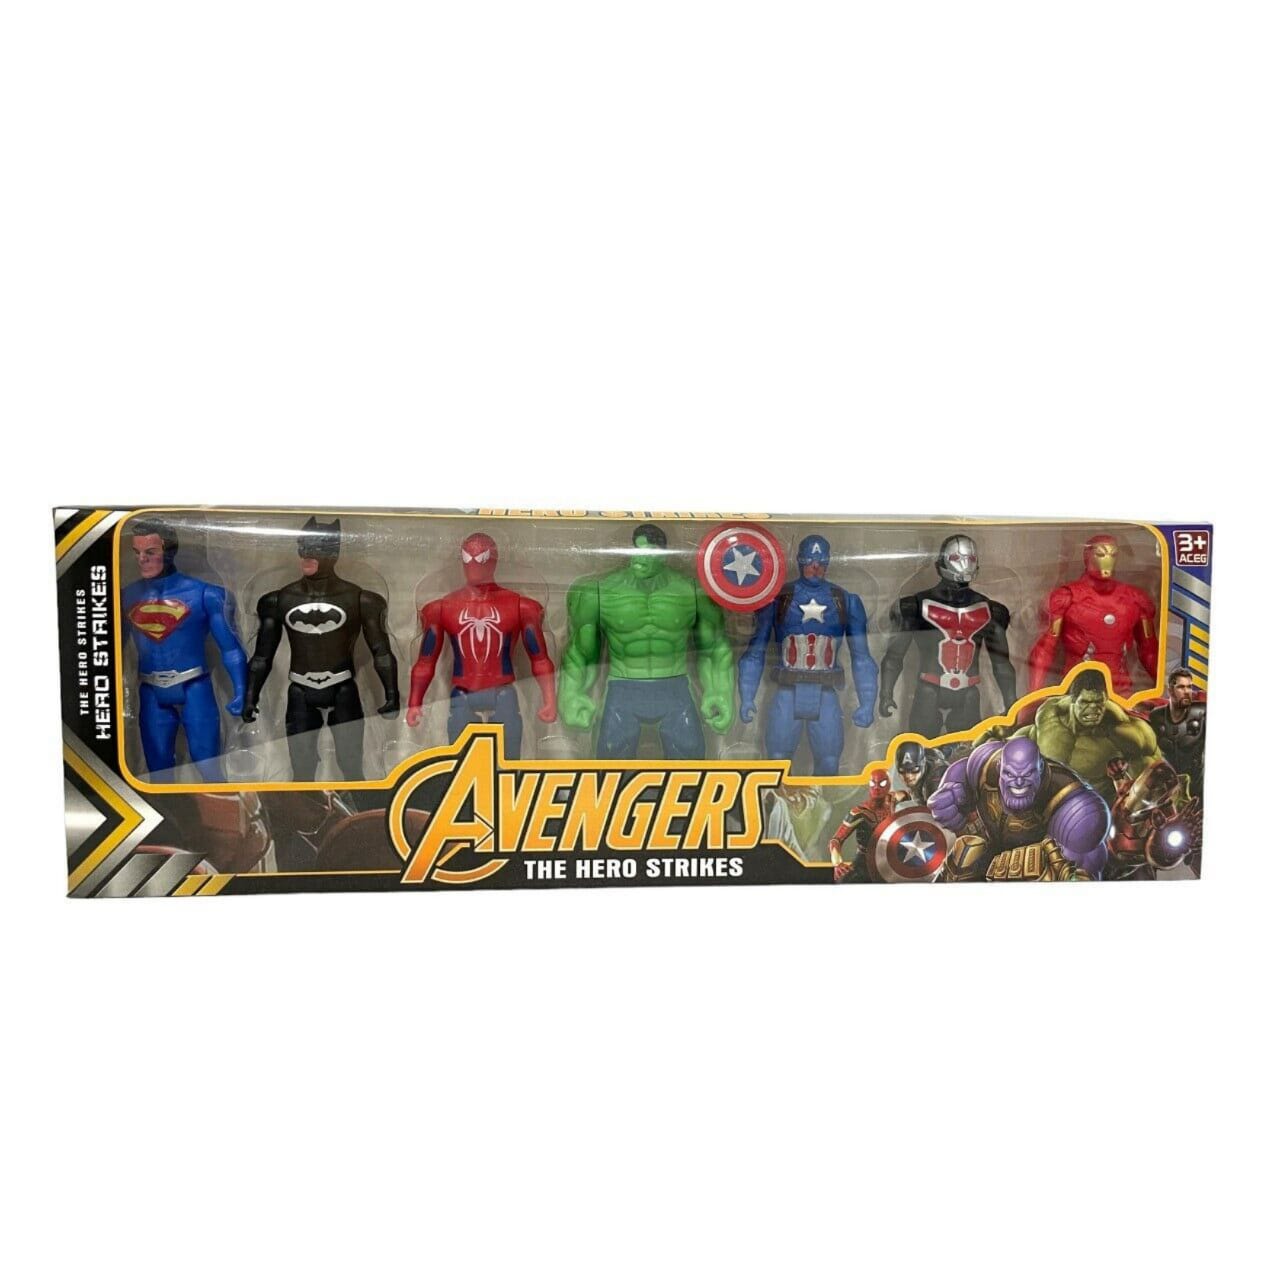 Marvellous Avengers Infinity War Alliance Leader Projection Action Figures Play